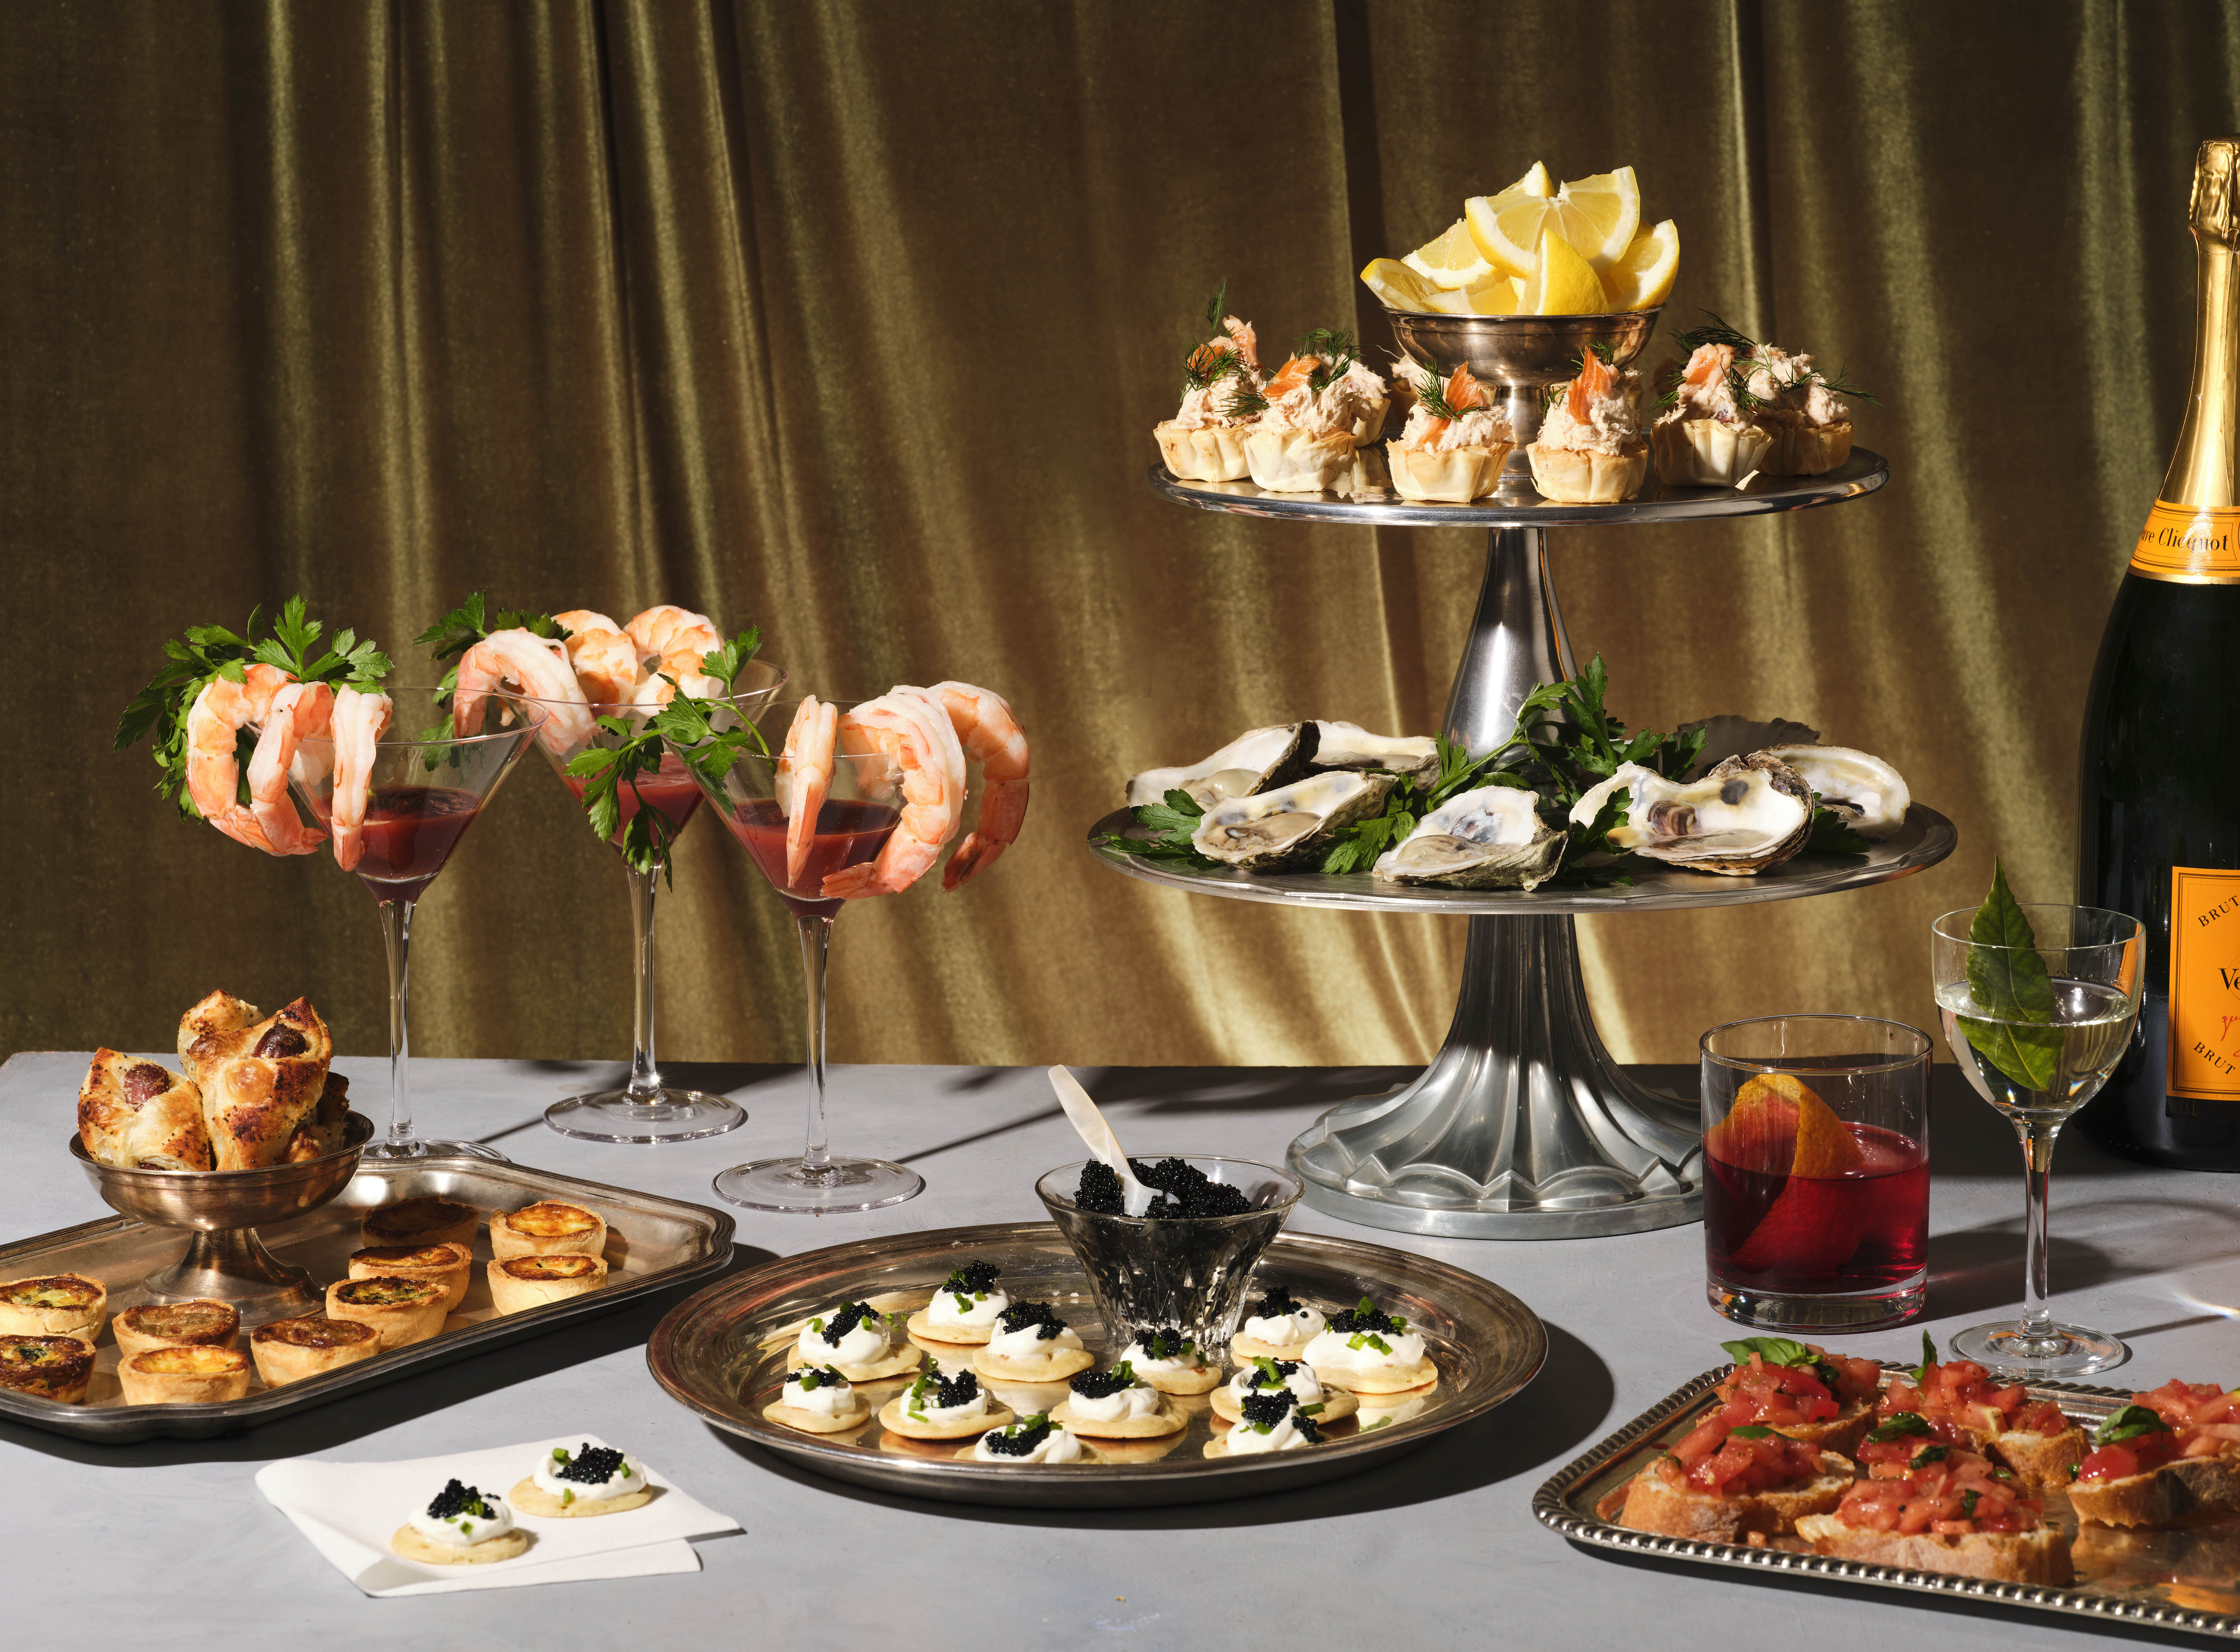 A table set with an array of appetizers, including shrimp cocktail, oysters, blinis, and canapes.